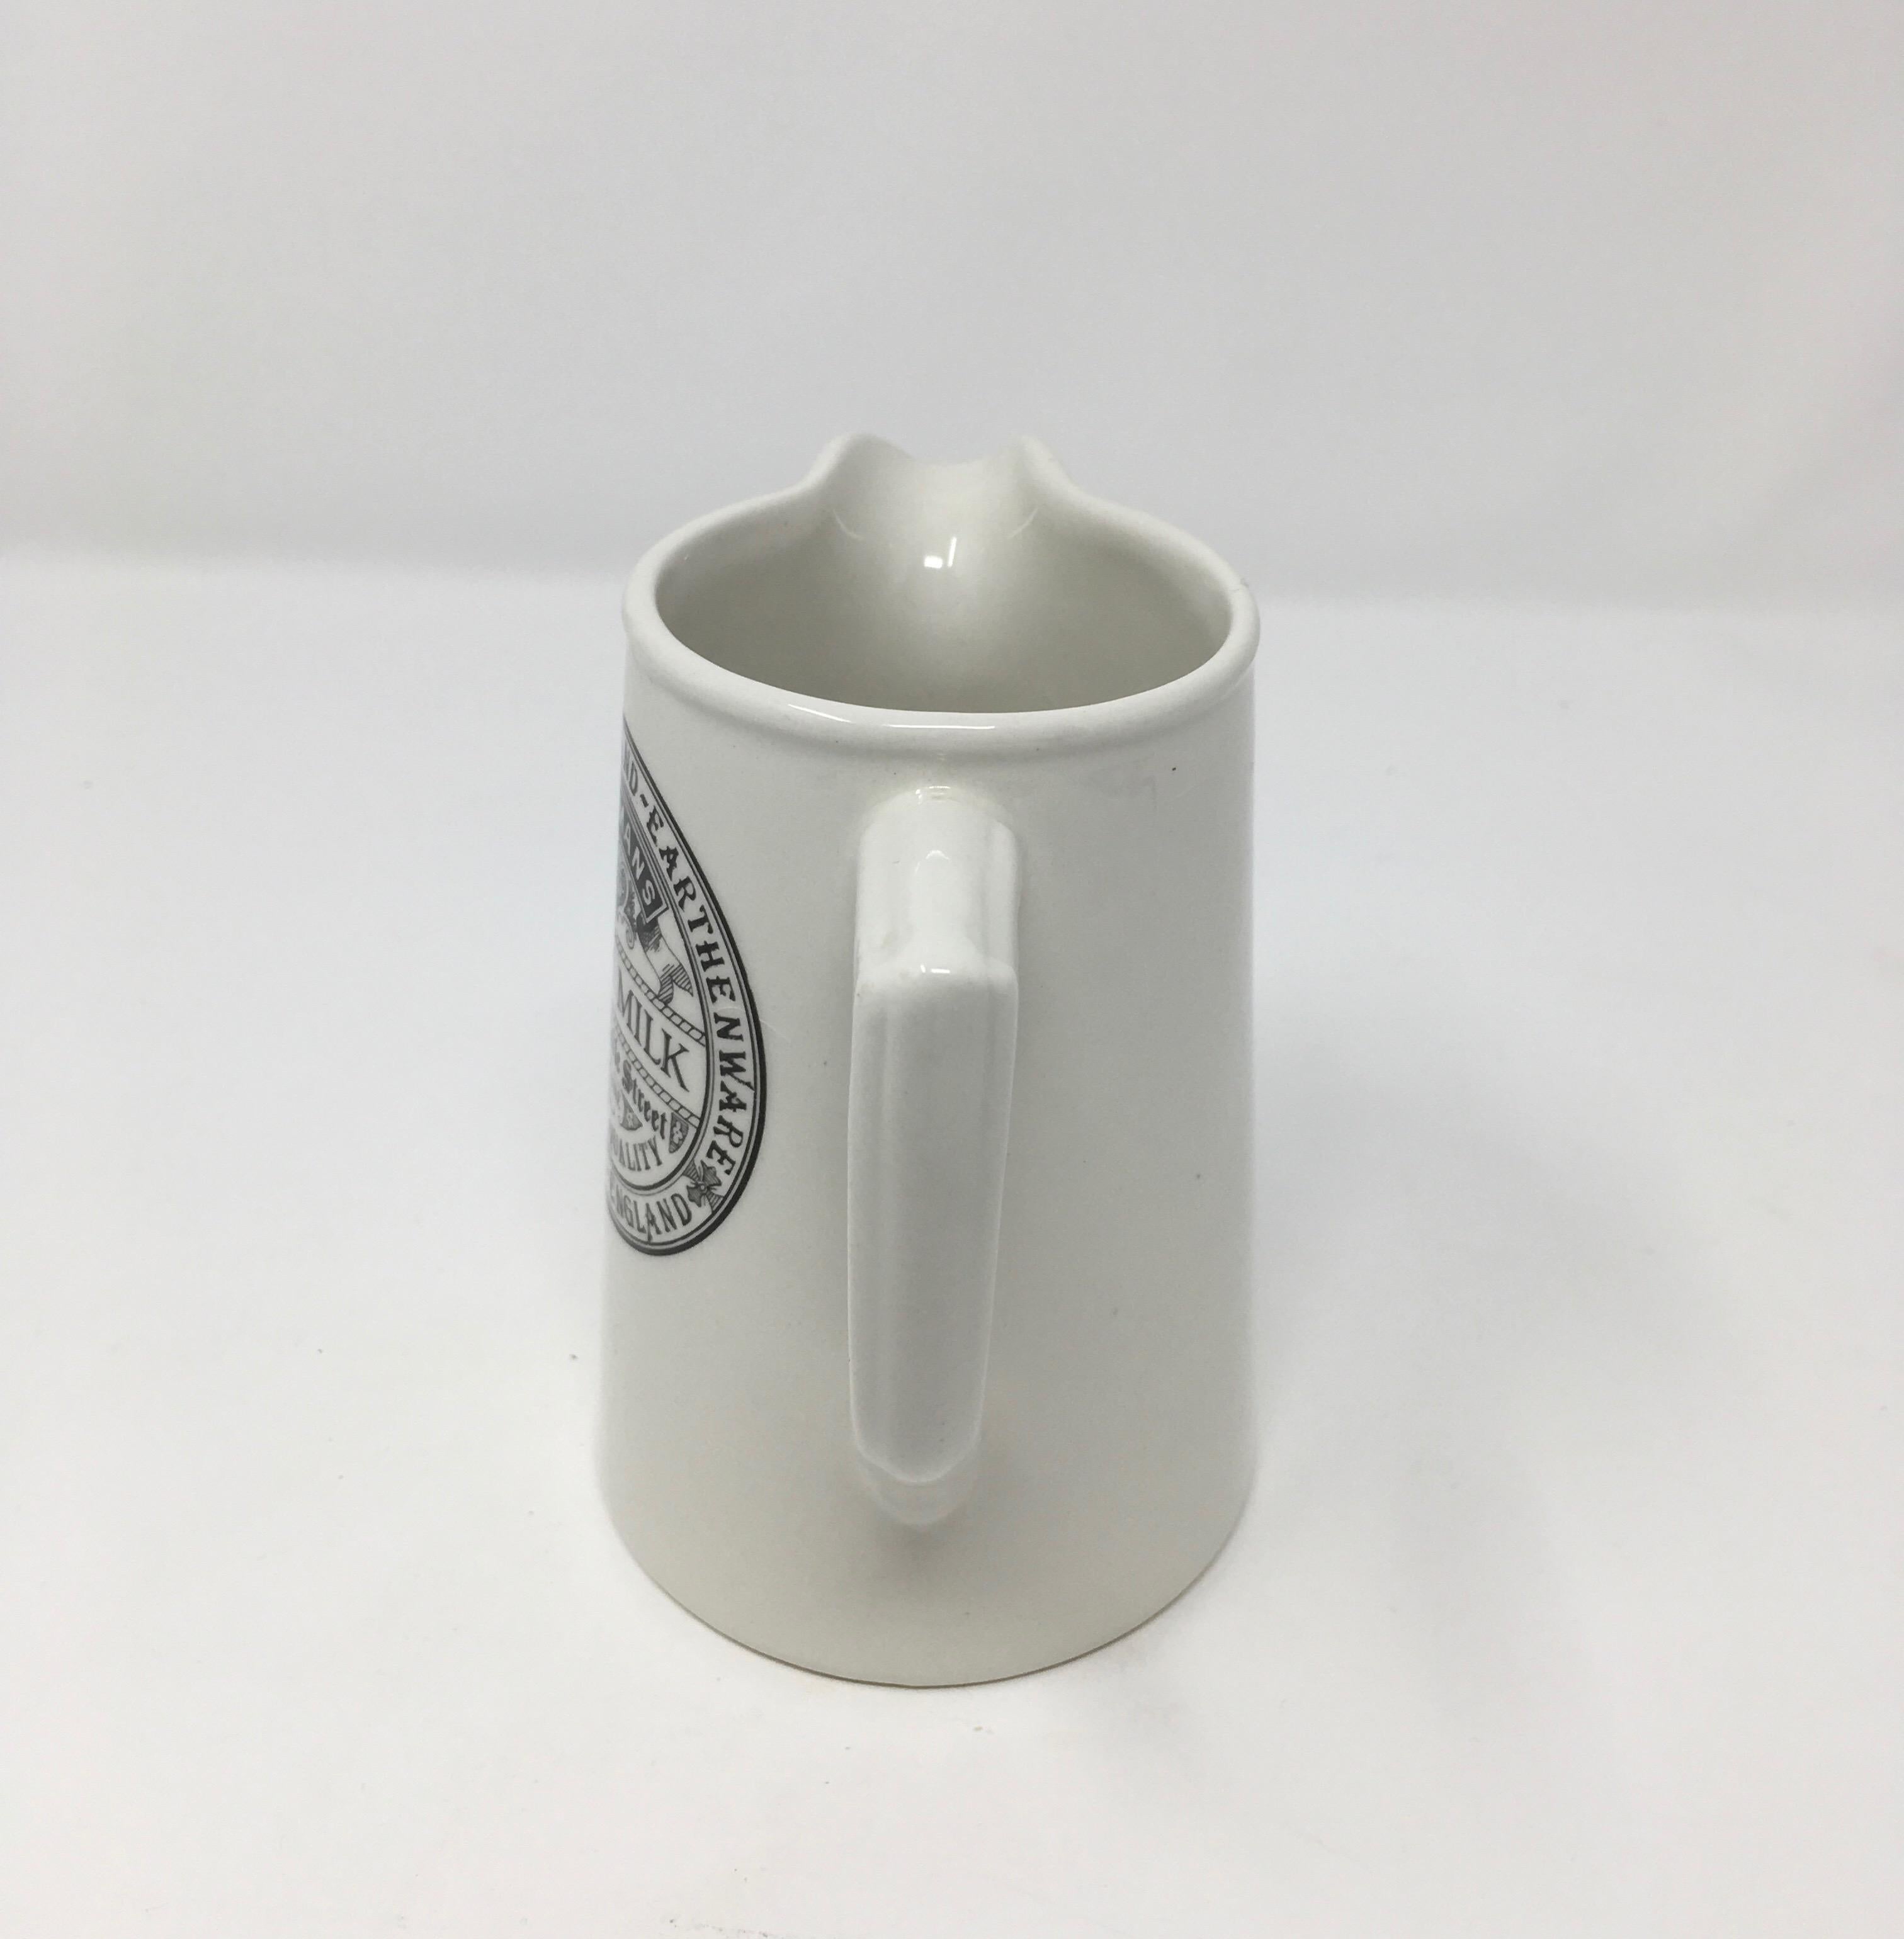 This is an English advertising pottery pitcher. The pitcher has a maker embossed mark on the bottom which reads Sadler England. James Sadler and Sons was a pottery manufacturer founded in 1882 by James Sadler in Burslem, Stoke-on-Trent, United